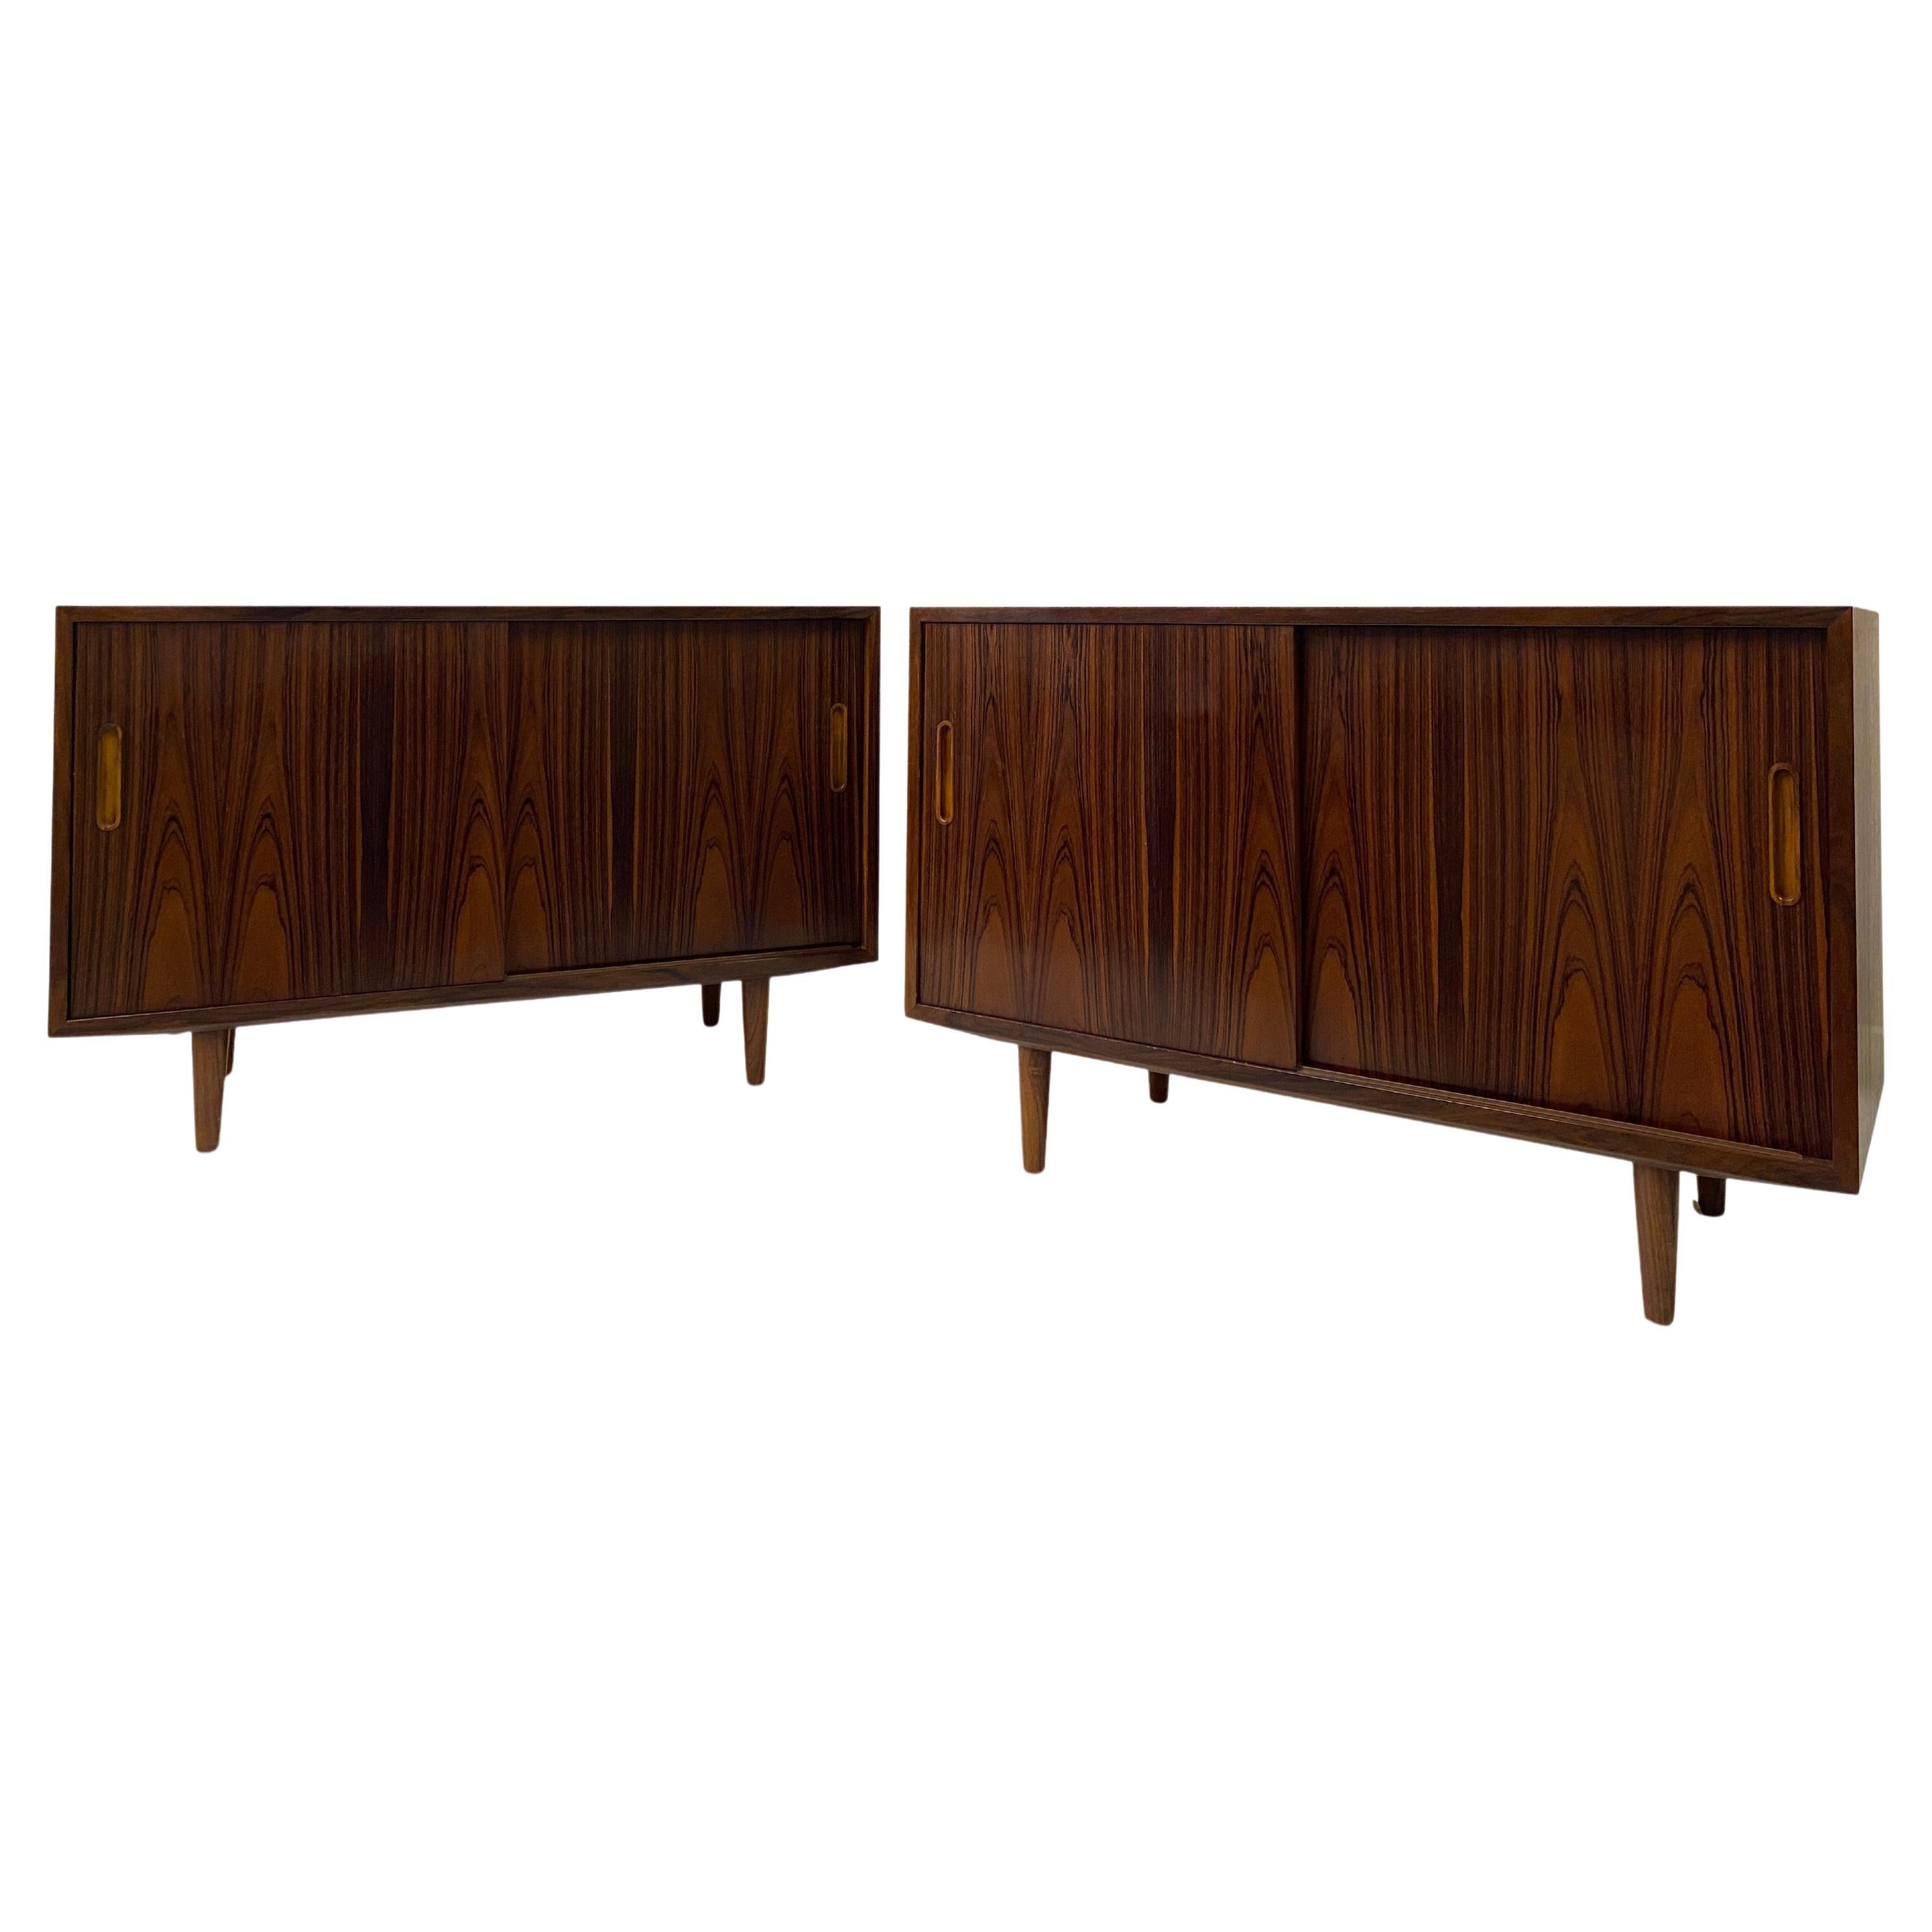 Pair of 1970s Danish Rosewood Cabinets by Poul Hundevad